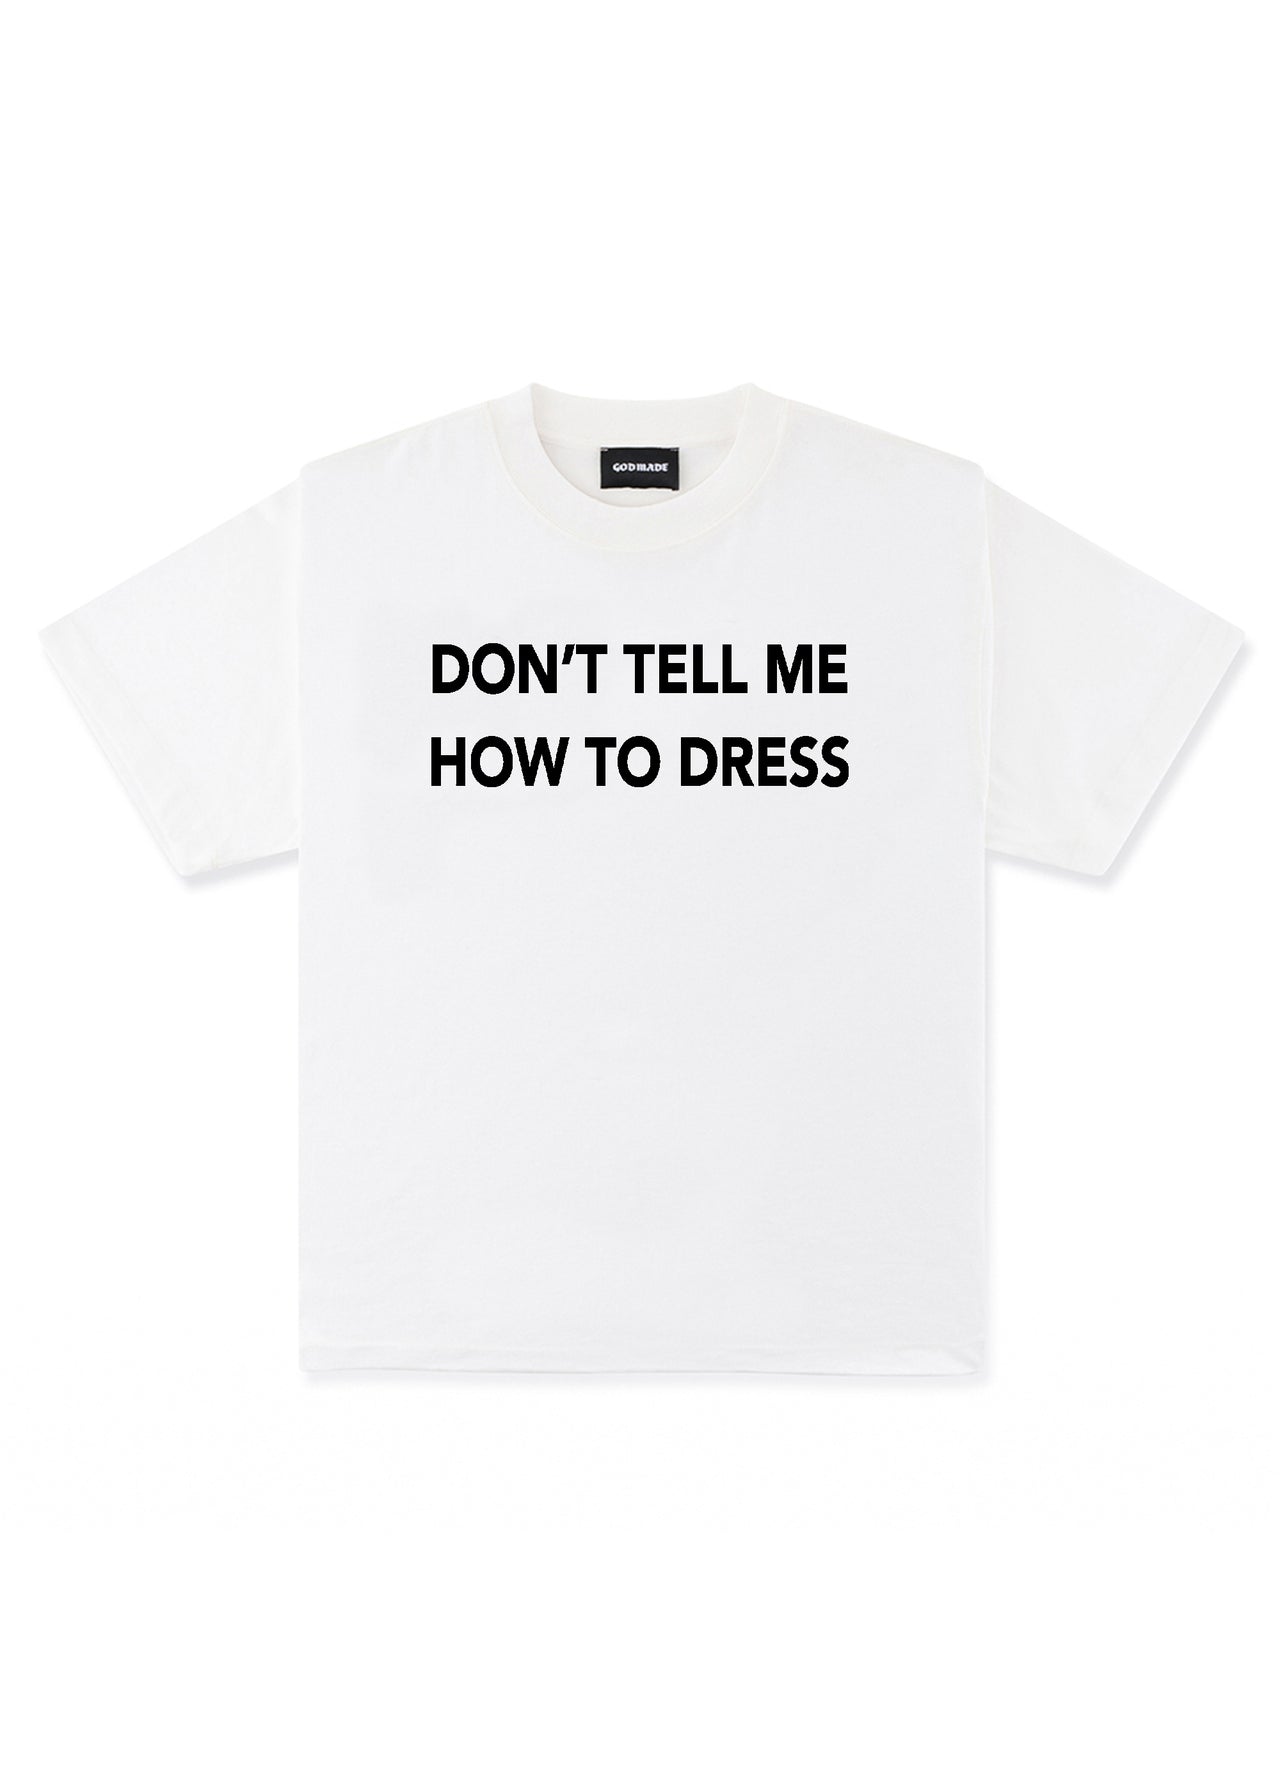 DON'T TELL ME HOW TO DRESS - WHITE T-SHIRT